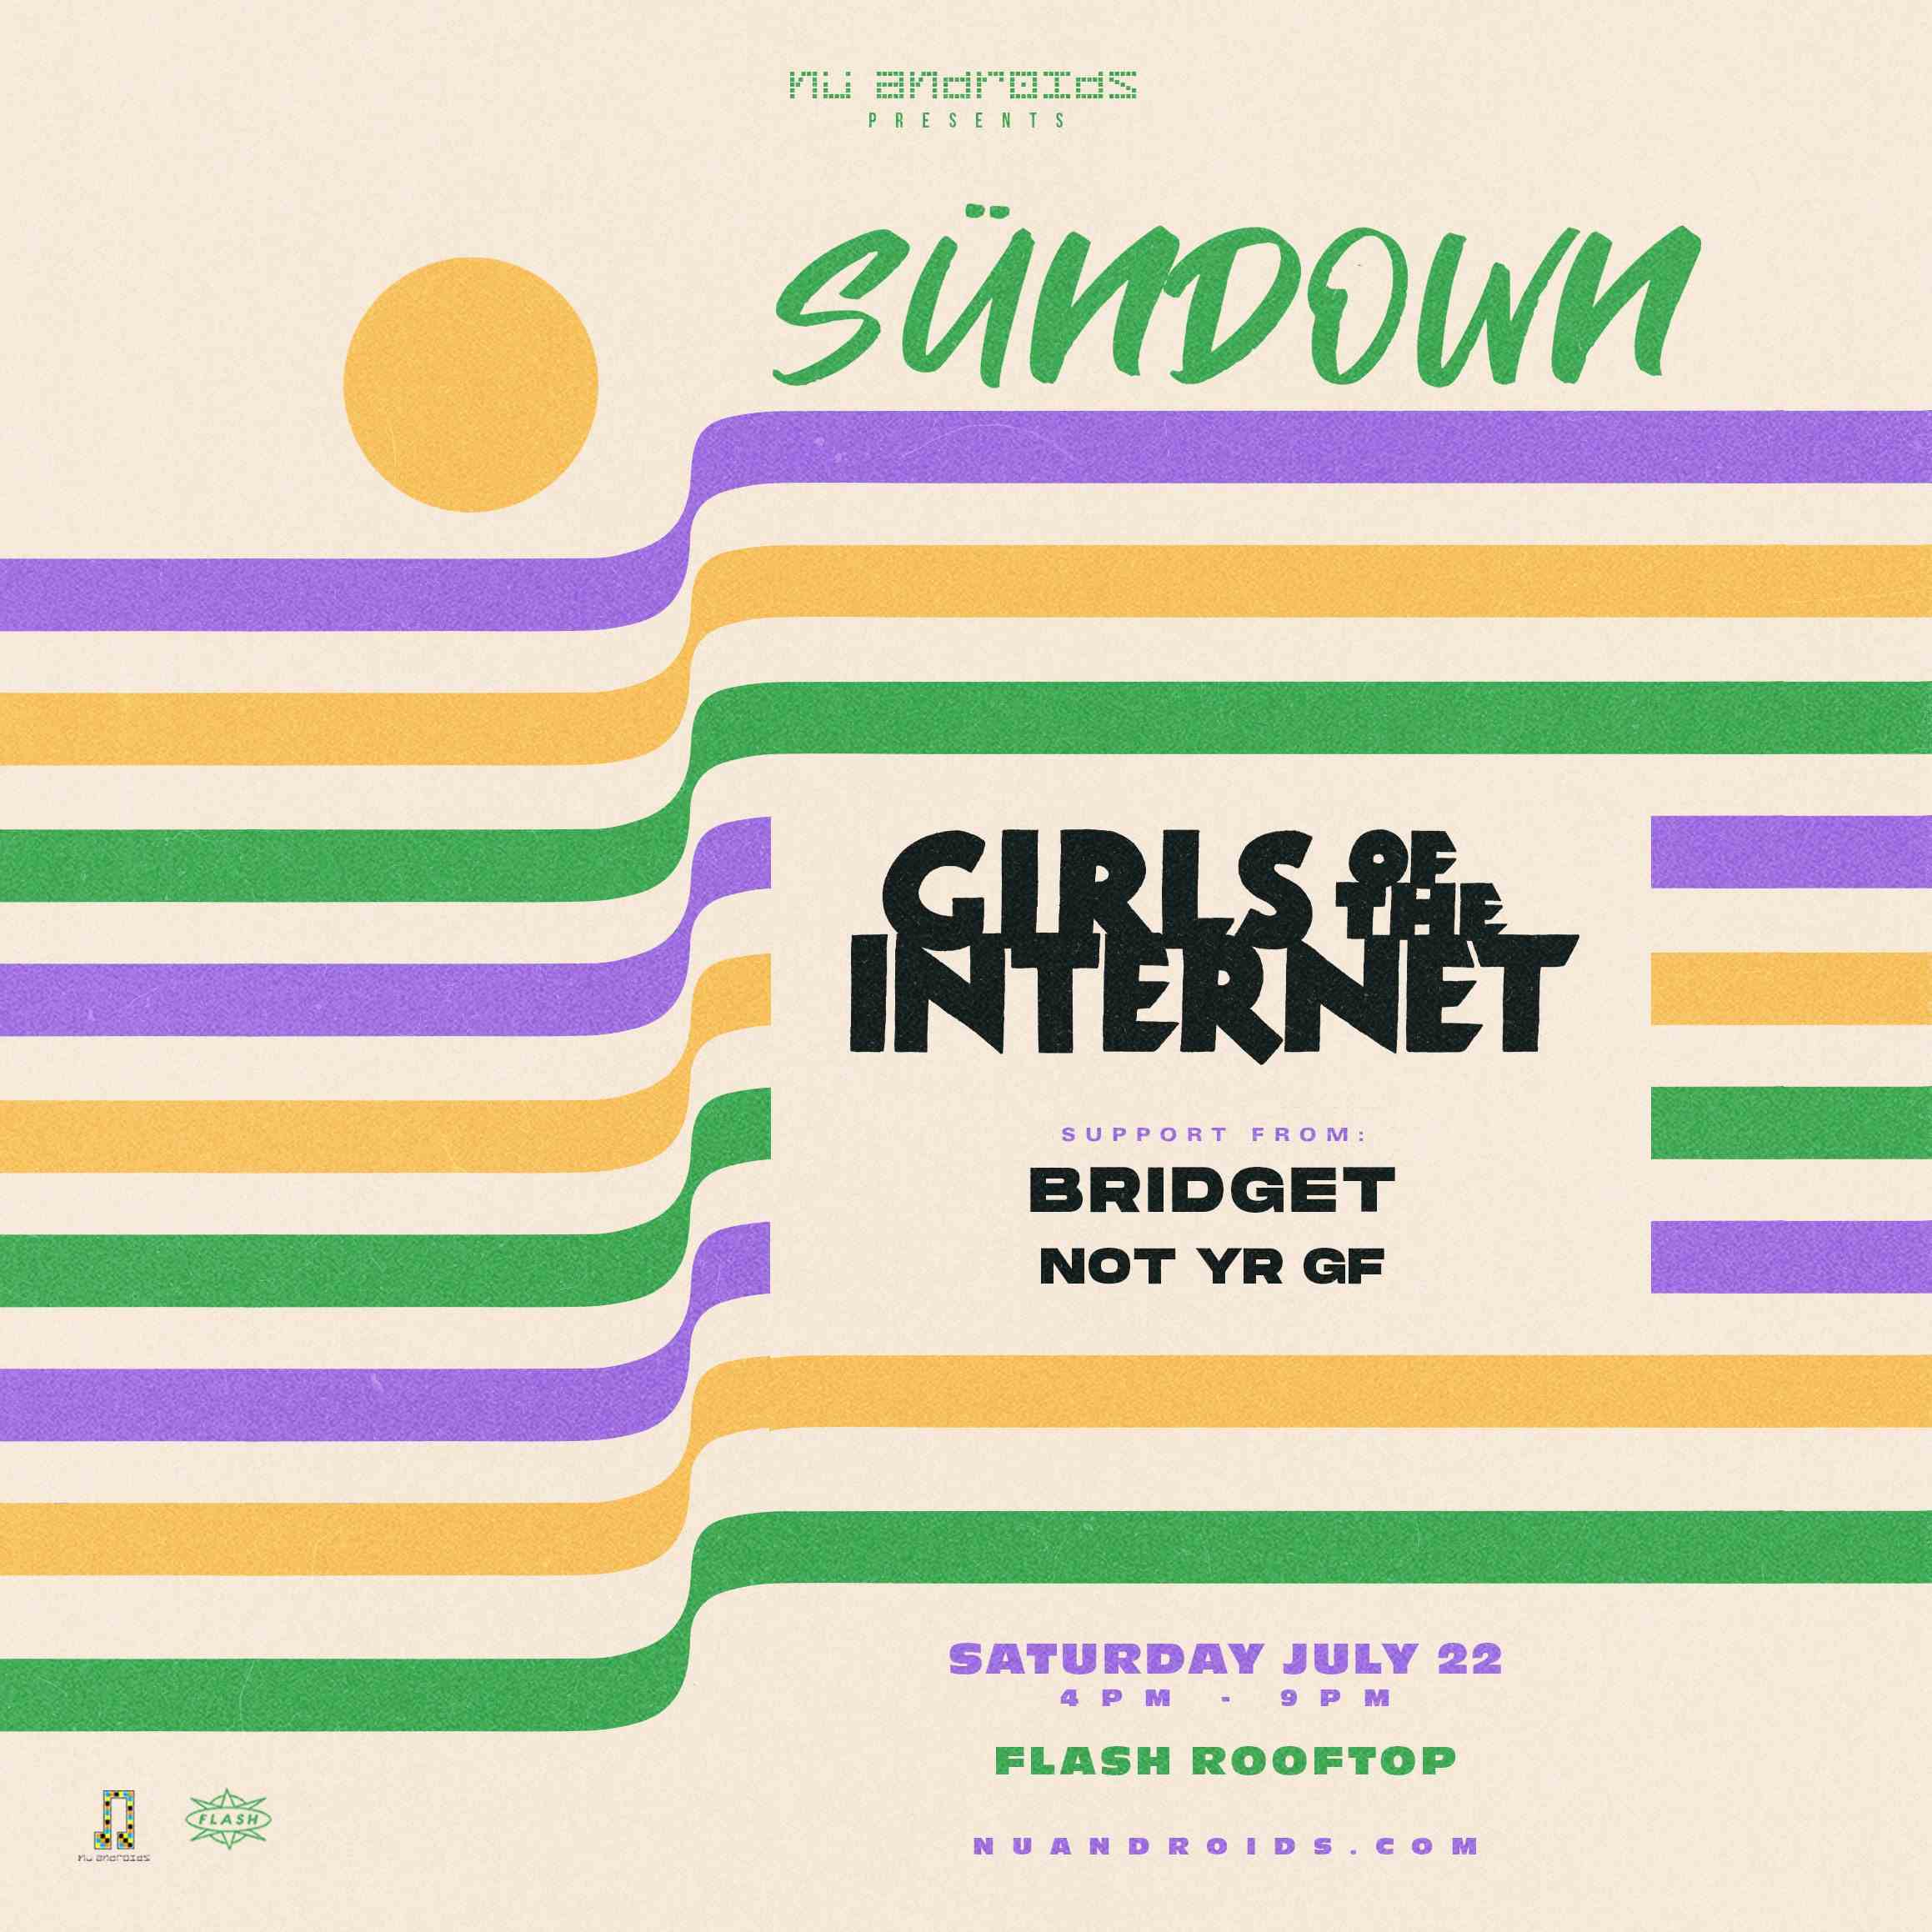 Event image for Nü Androids Presents SünDown: Girls of the Internet (21+)